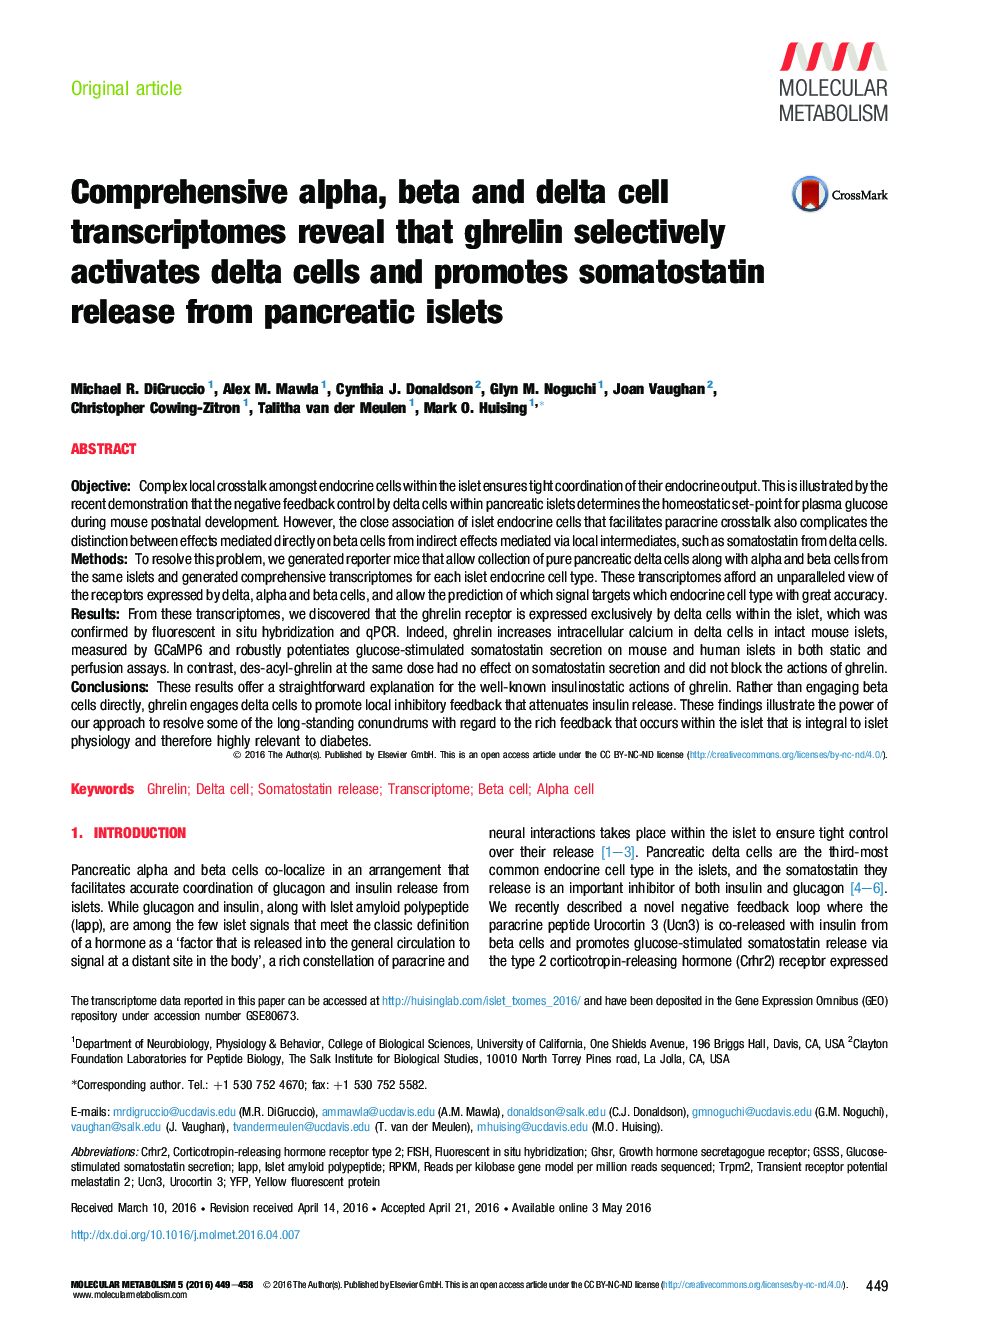 Comprehensive alpha, beta and delta cell transcriptomes reveal that ghrelin selectively activates delta cells and promotes somatostatin release from pancreatic islets 